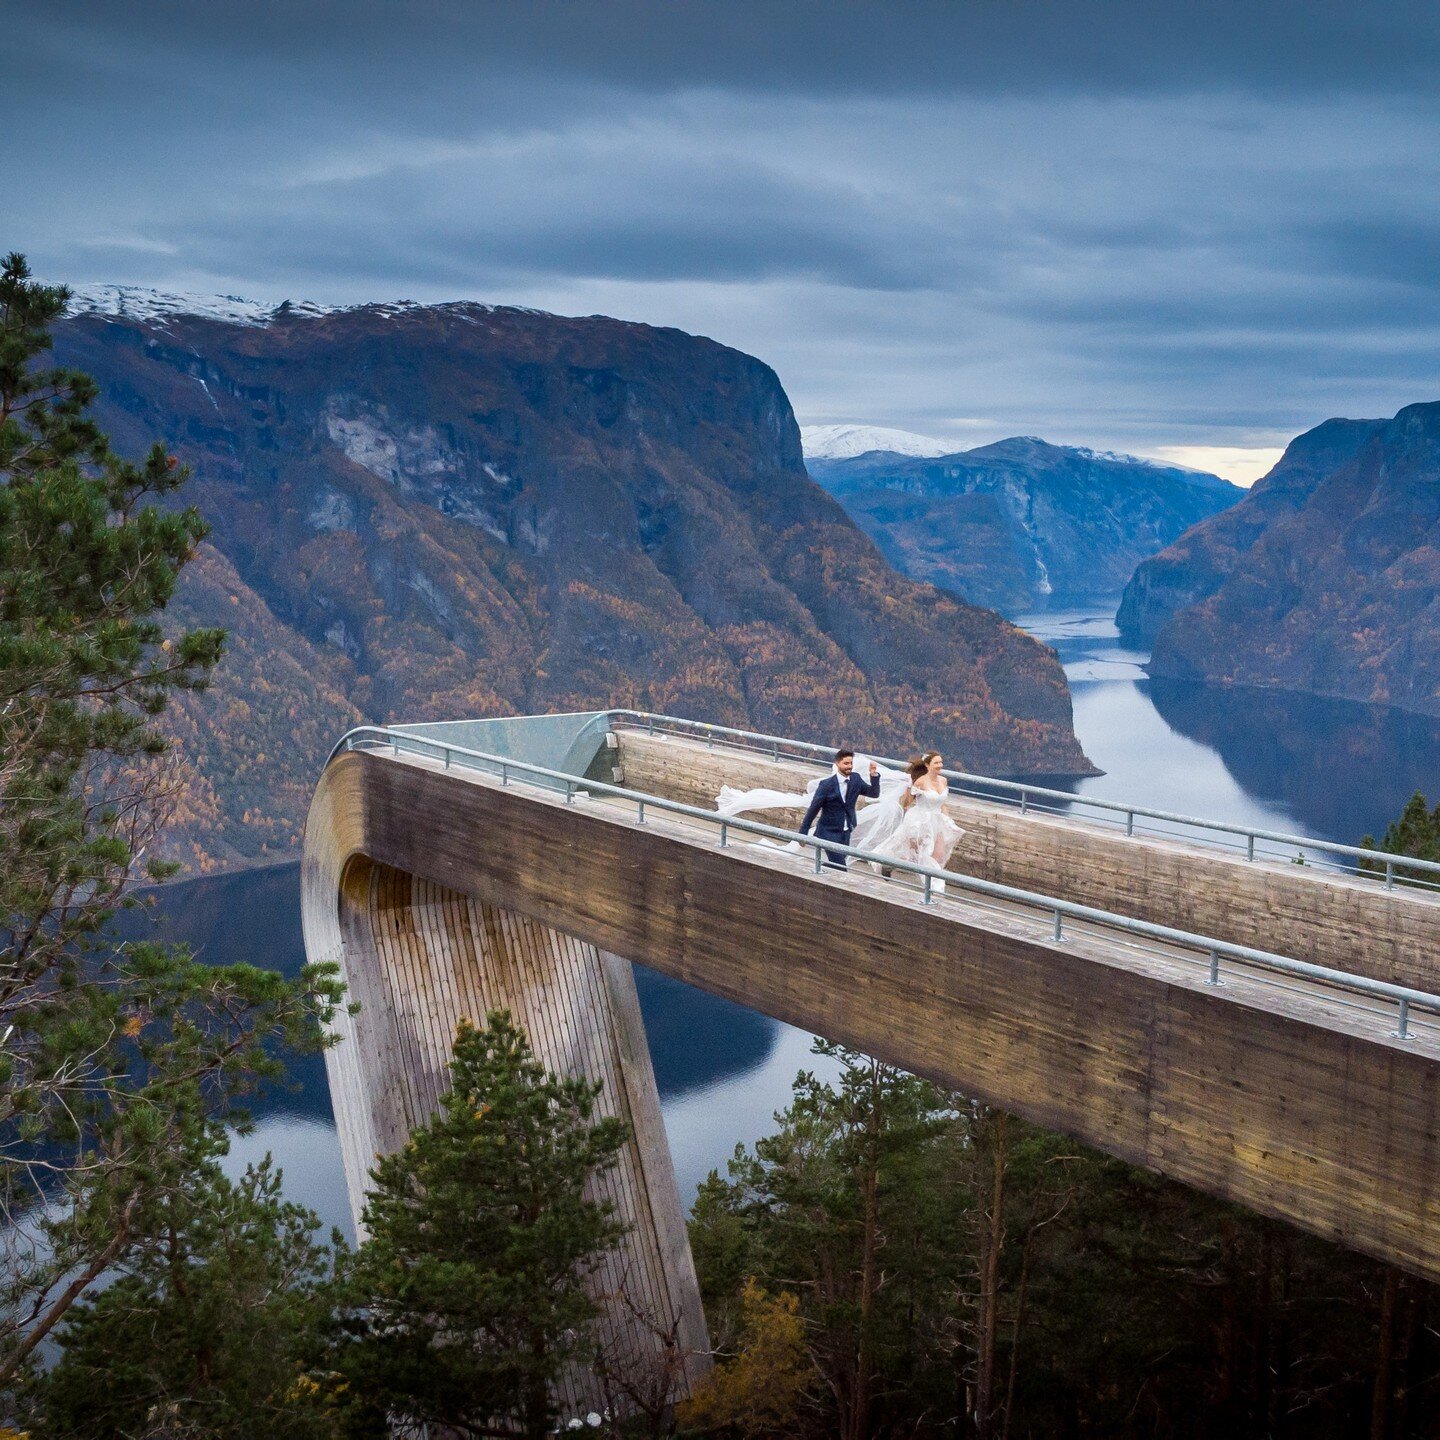 One of the most exhilarating elopement places in Norway. You will visit this location on your SUV photoshoot adventure. Epic pictures guaranteed...

@get_married_in_norway 

#stegasteinviewpoint #stegasteinelopement
#fjordweddingsandelopements #fjord